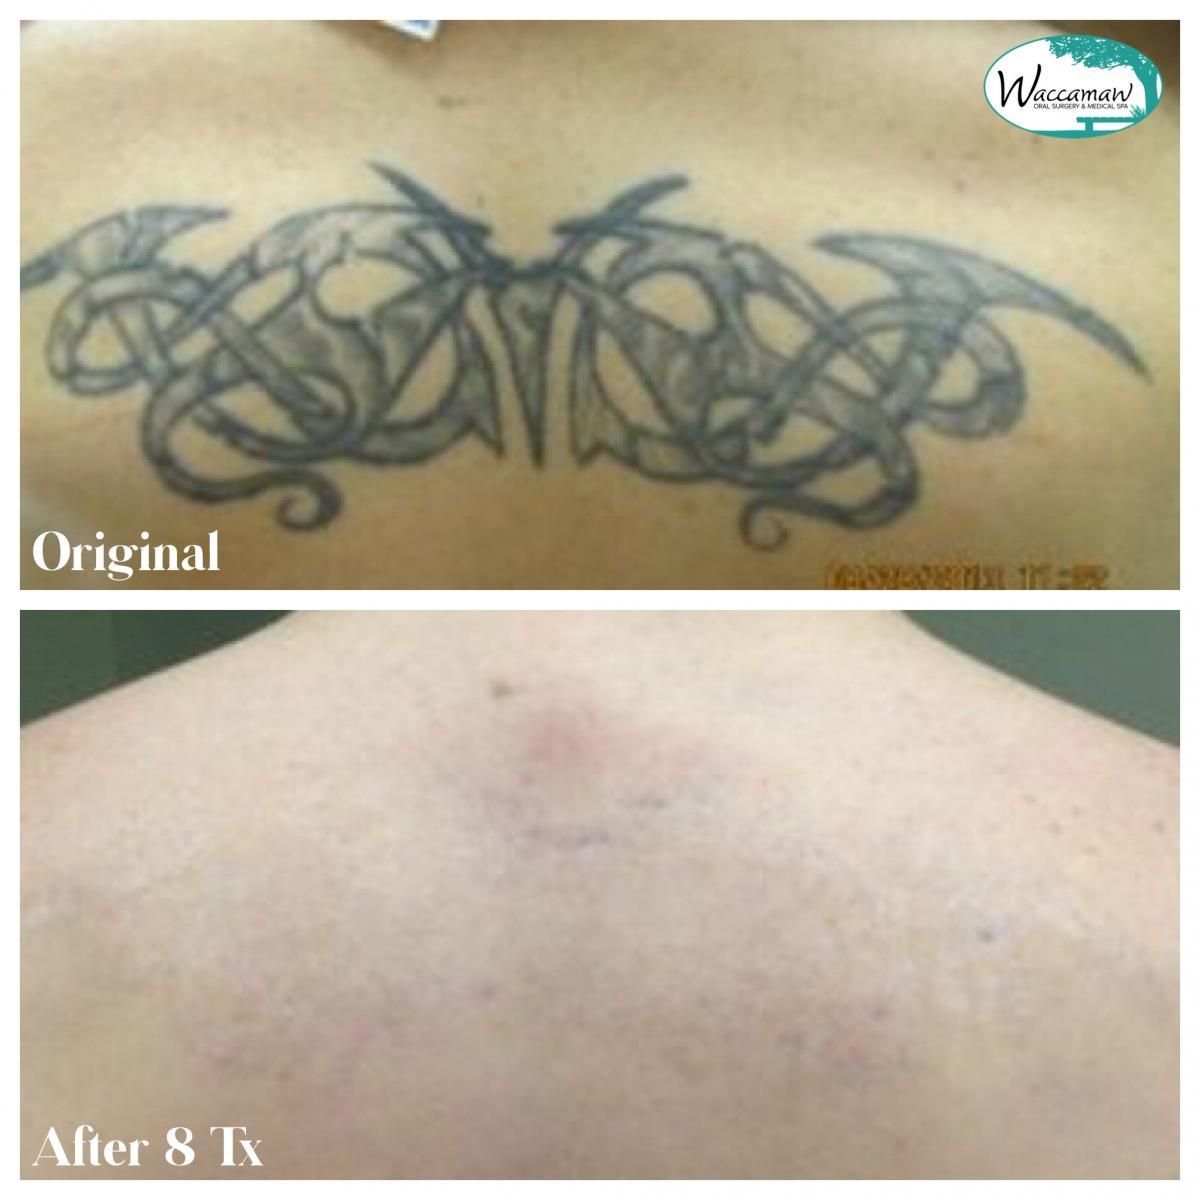 Laser Tattoo Removal by Dr  Myrtle Beach Plastic Surgery  Facebook